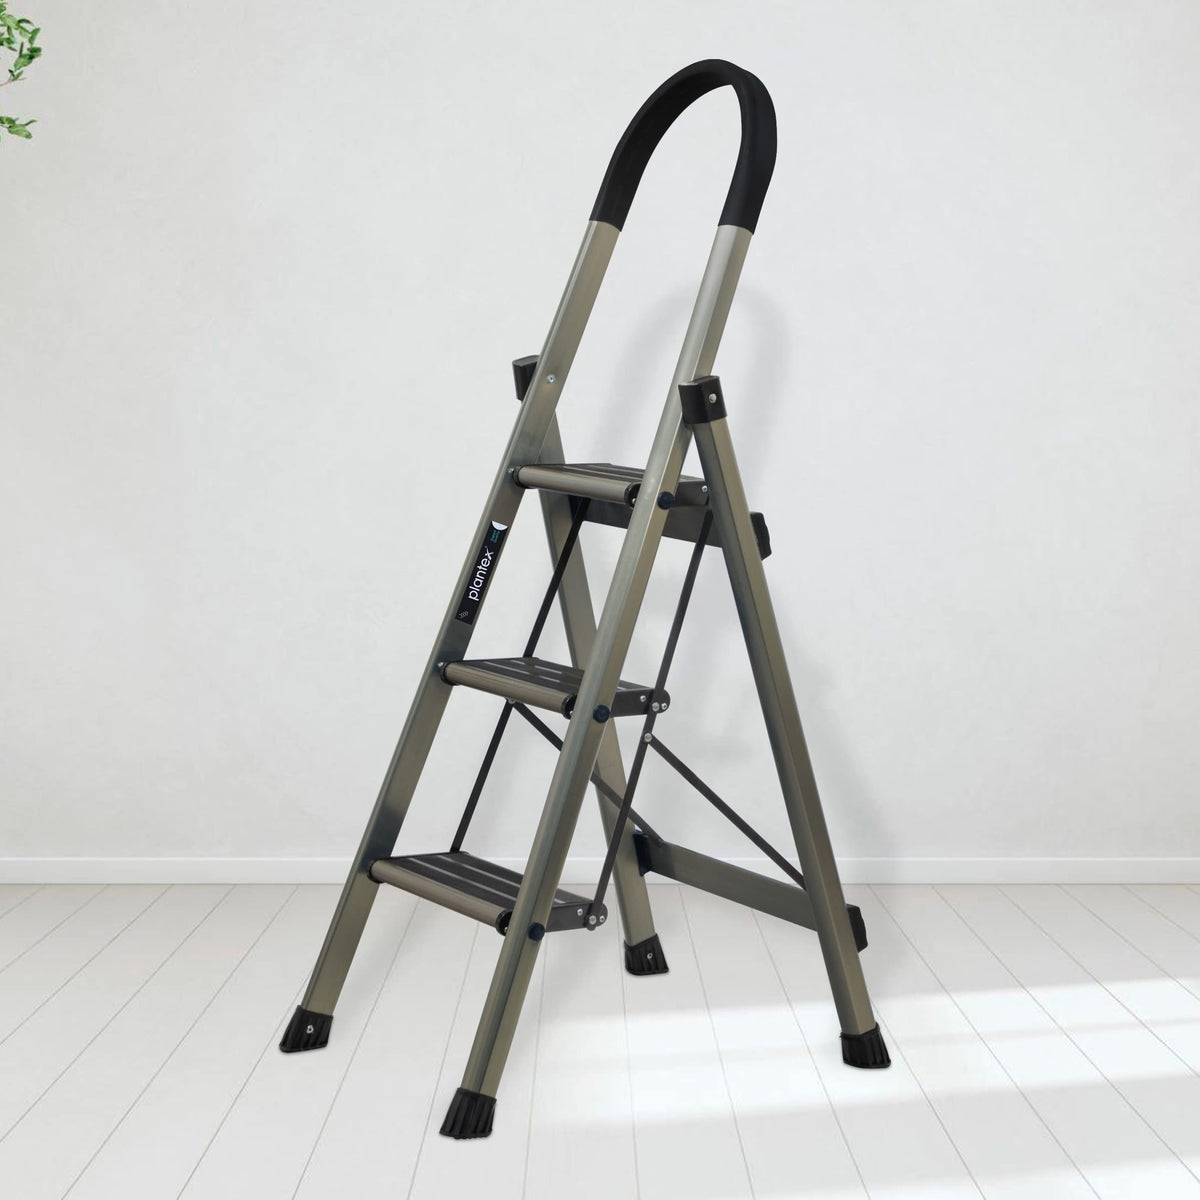 Plantex Ladder for Home-Foldable Aluminium 3 Step Ladder-Wide Anti Skid Steps/Strong Wide Steps Ladder (Anodize Coated-Gold)